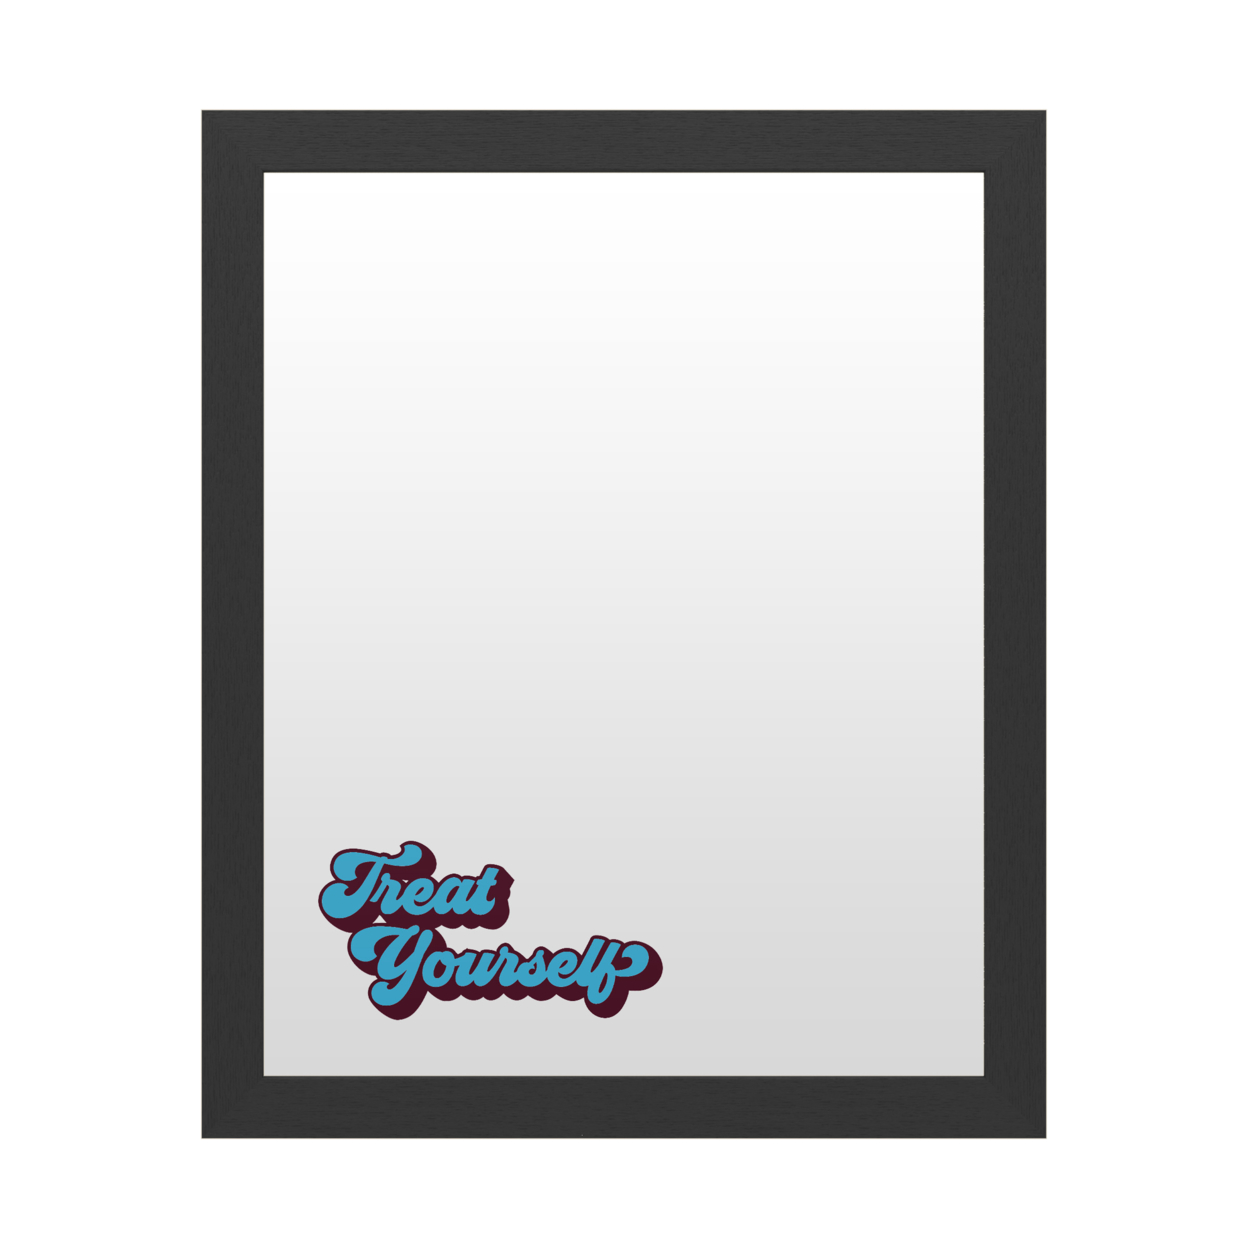 Dry Erase 16 X 20 Marker Board With Printed Artwork - Treat Yourself Dark Blue White Board - Ready To Hang